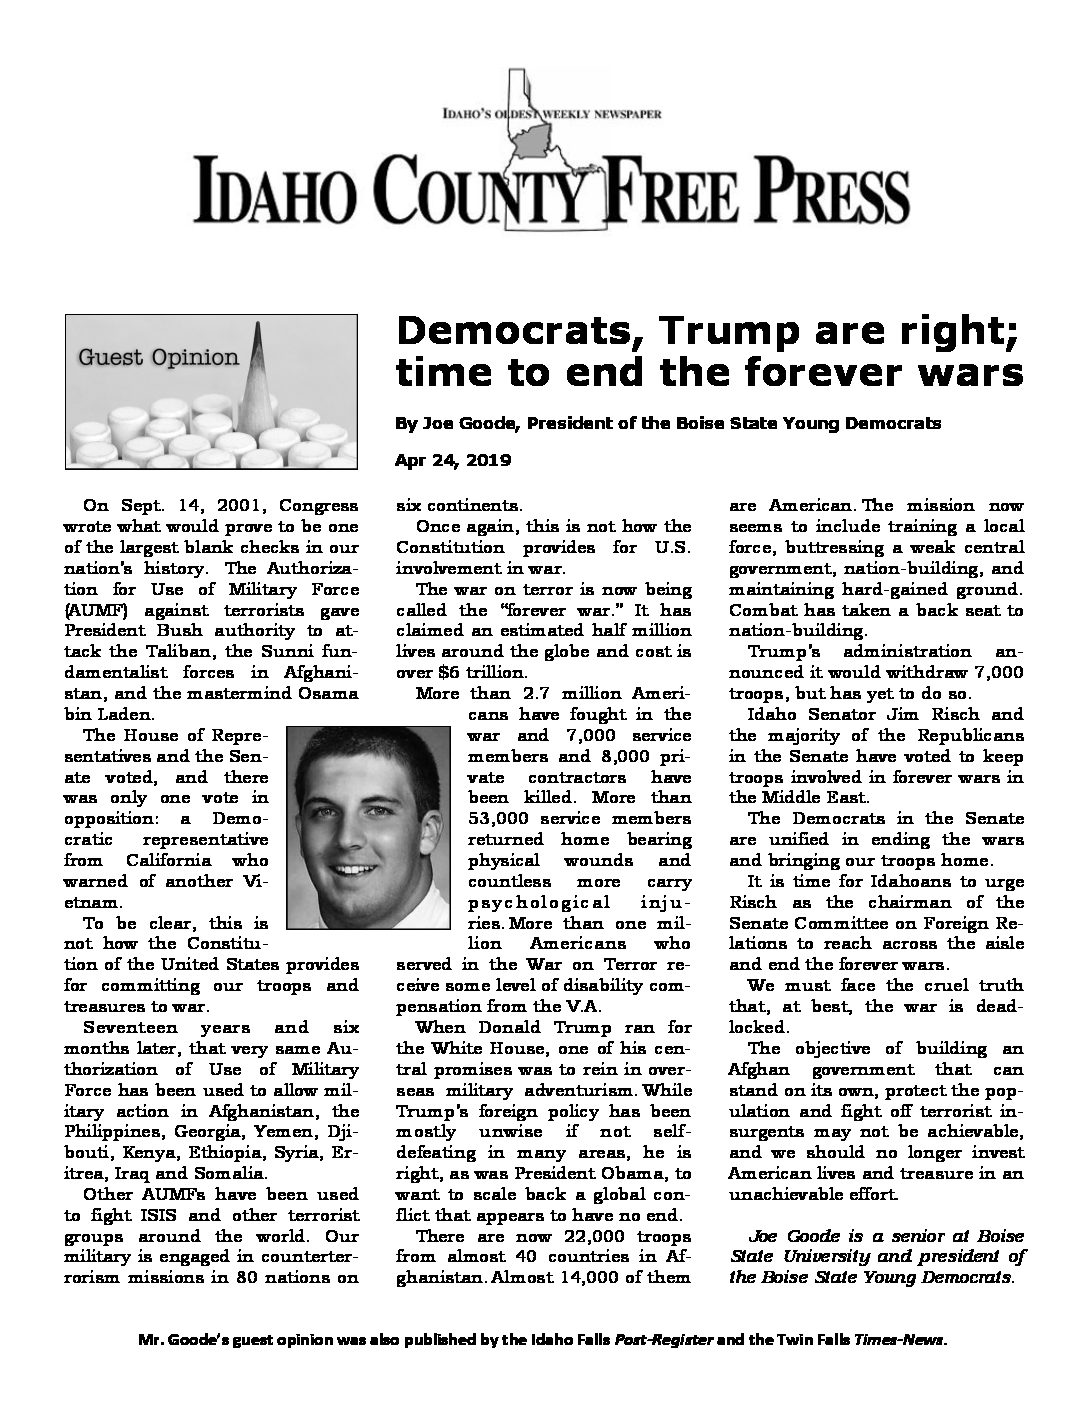 Idaho County Free Press – Democrats, Trump are right – time to end the forever wars